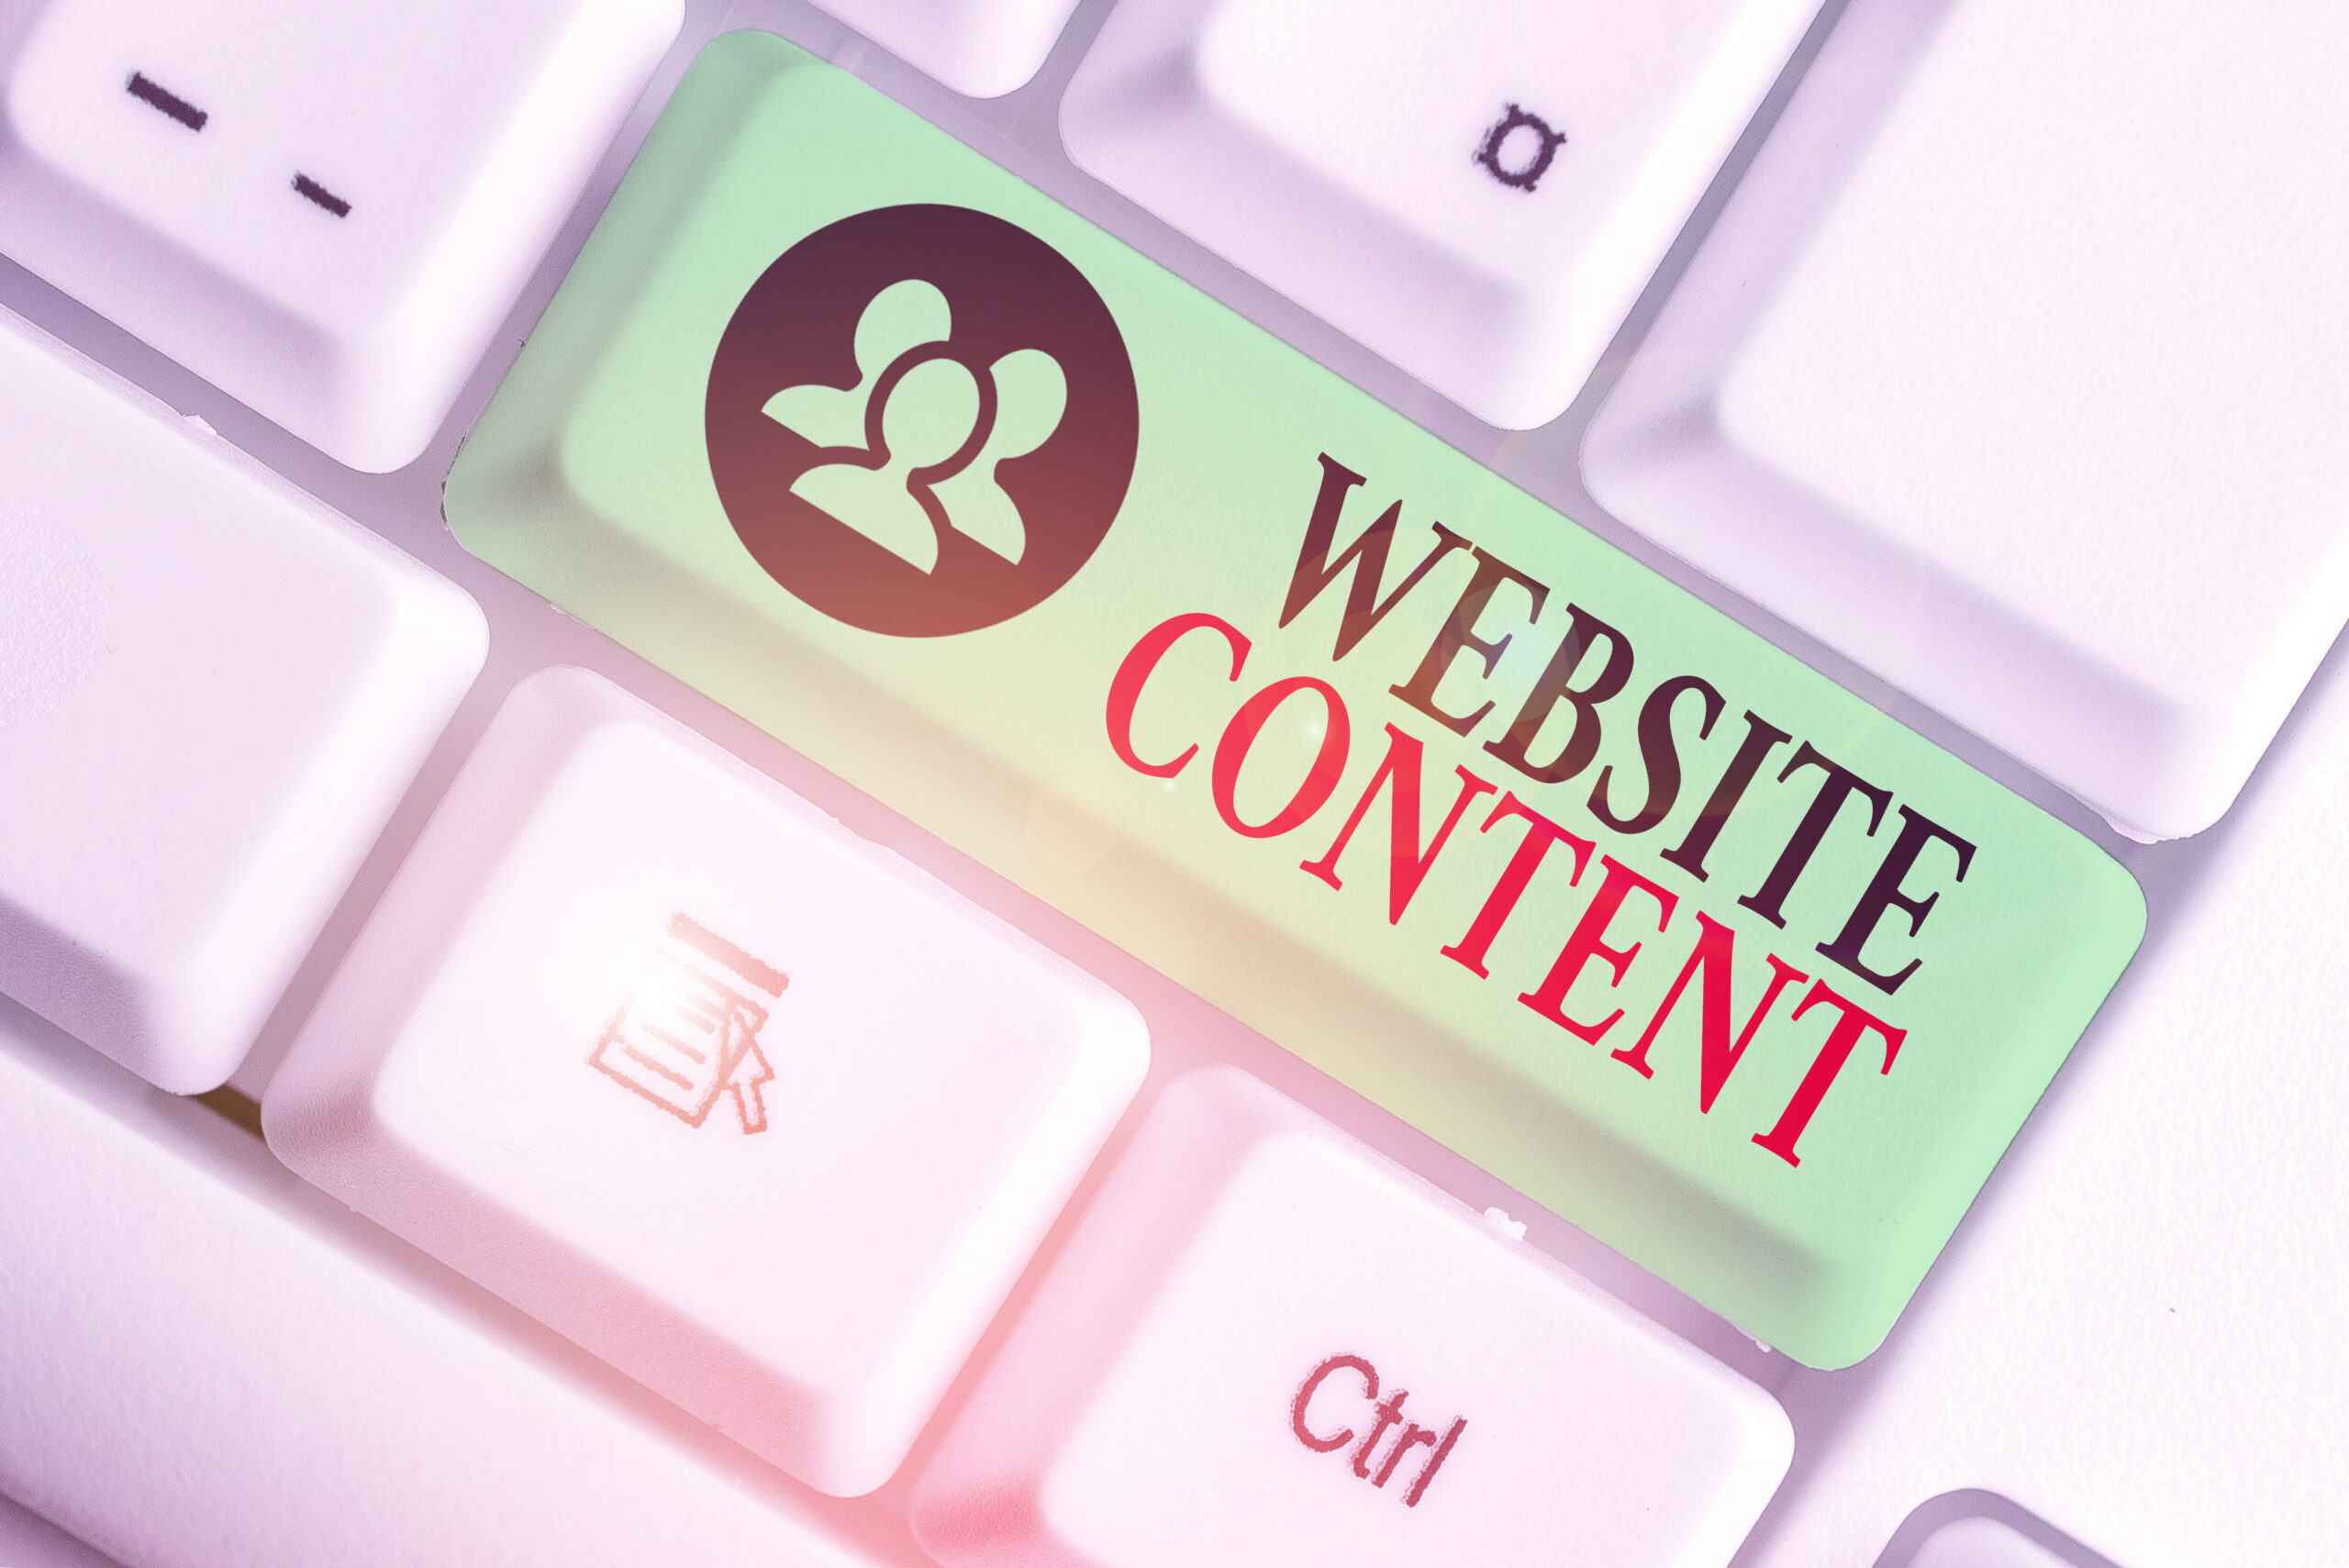 4 Great Ways to Repurpose Web Content